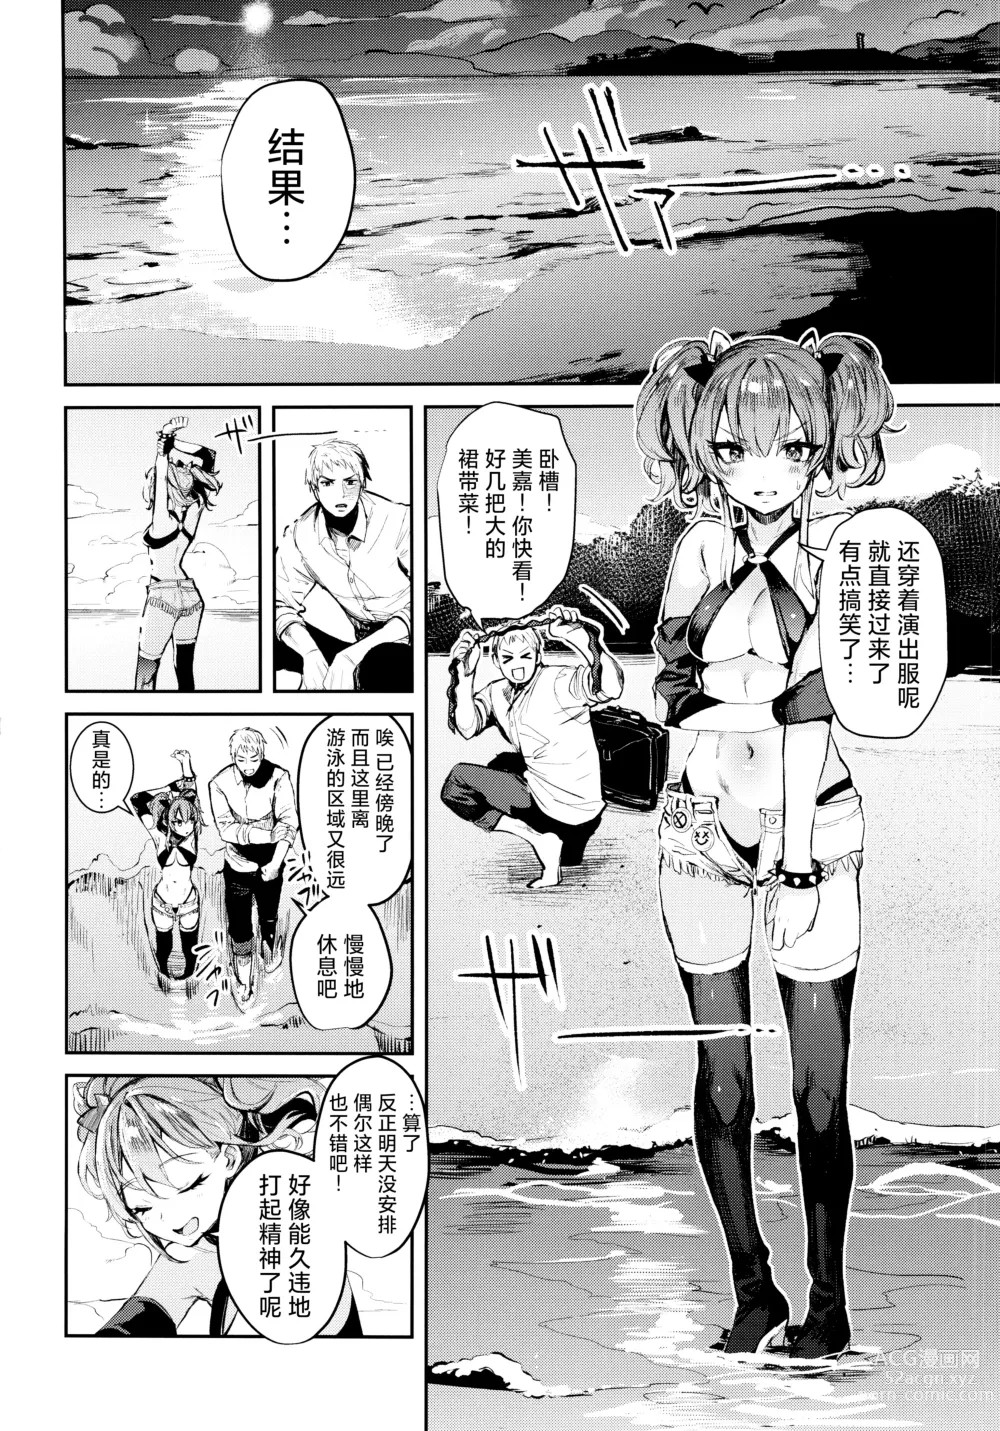 Page 8 of doujinshi 与美嘉两个人。